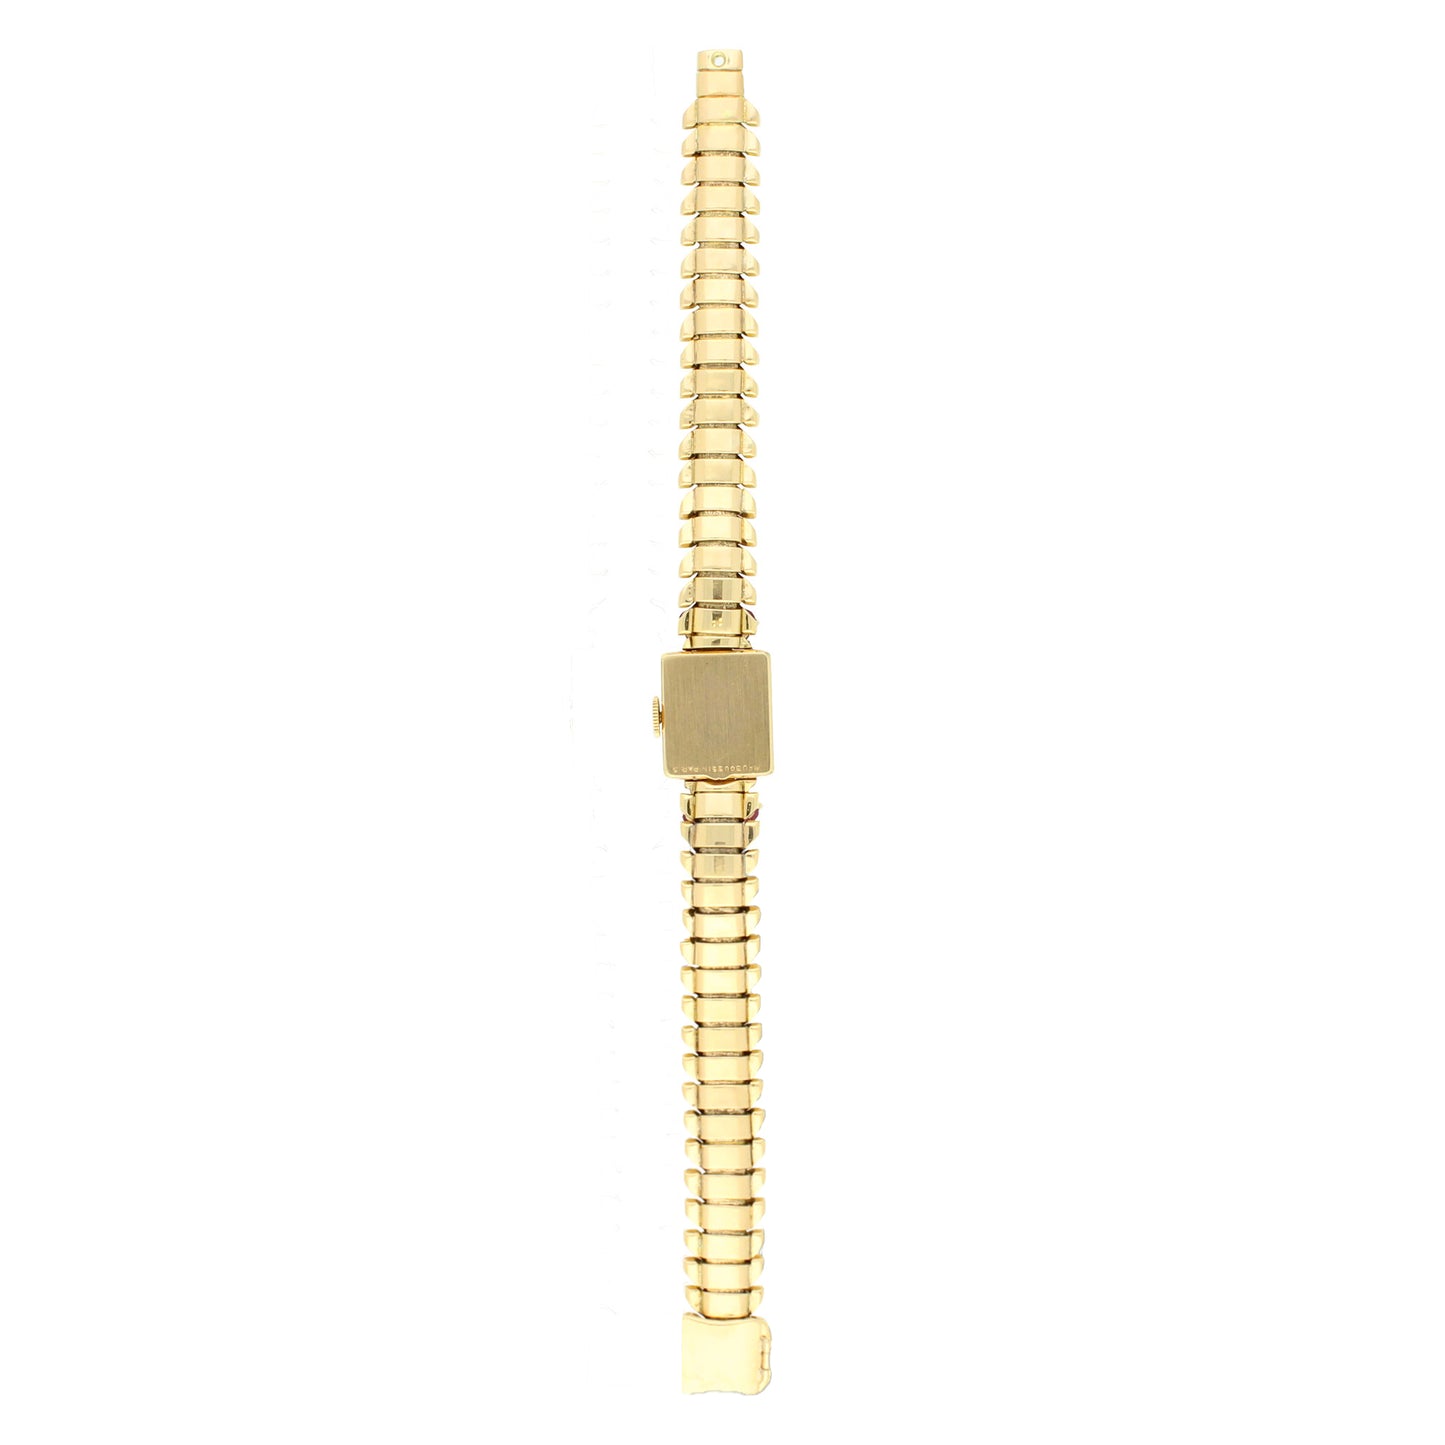 18ct rose gold, diamond and ruby set bracelet watch. Made 1940s